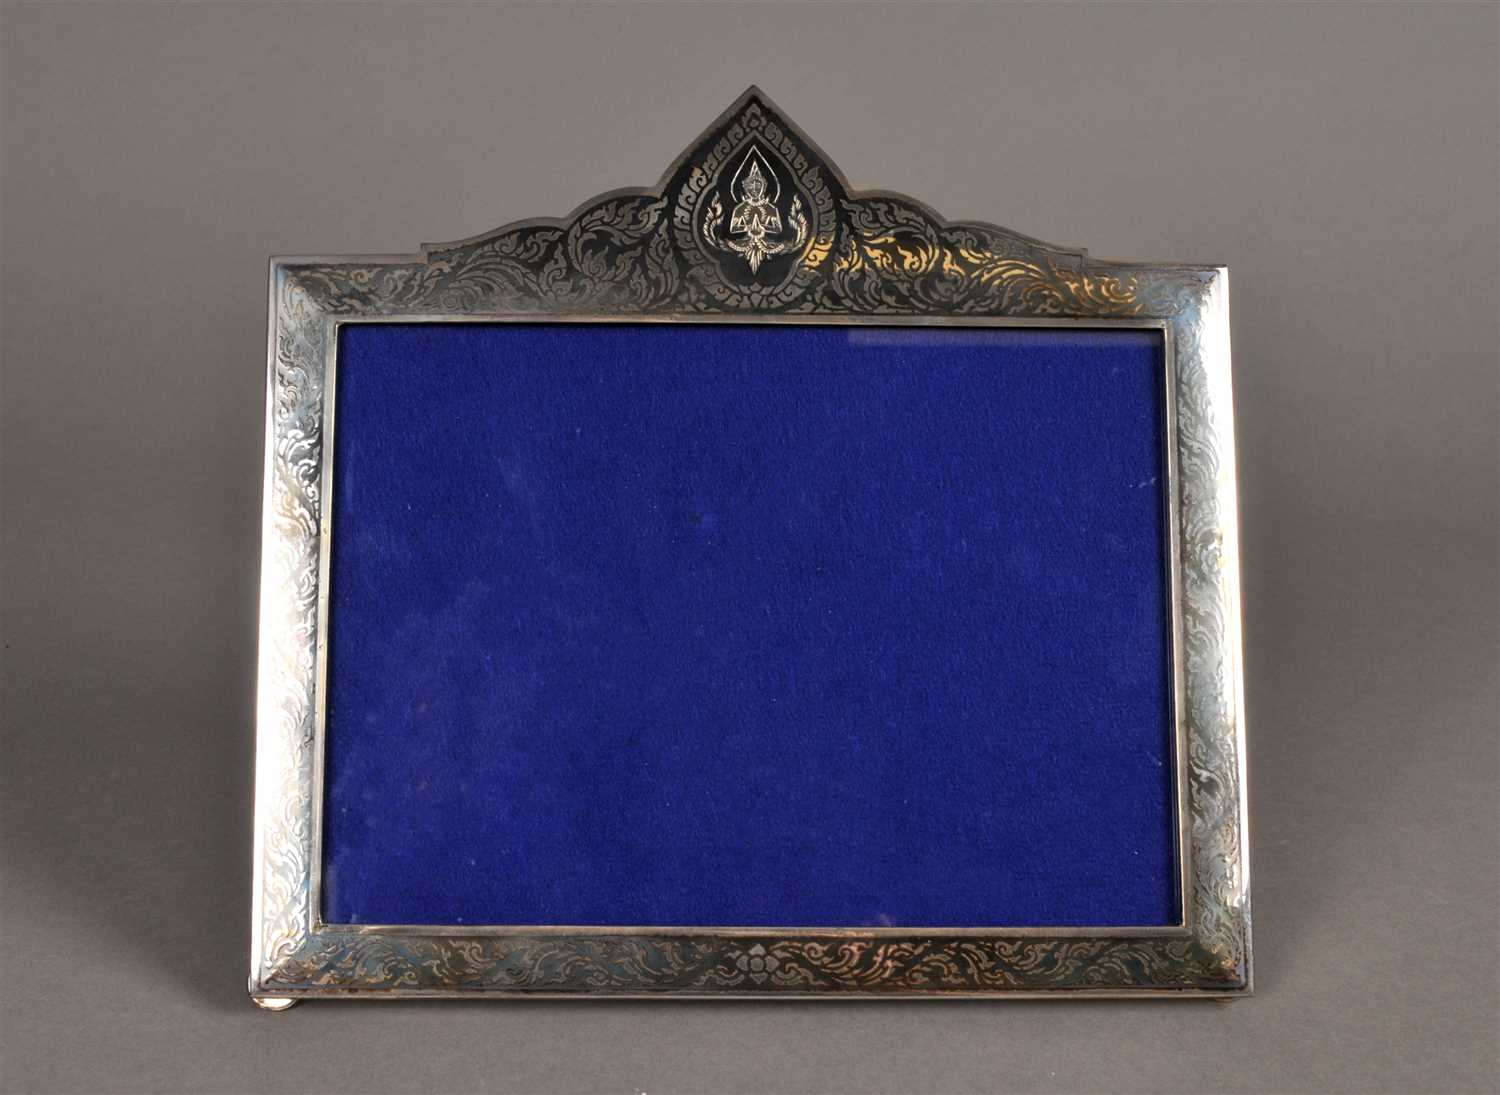 Lot 76 - A Siamese silver mounted photograph frame